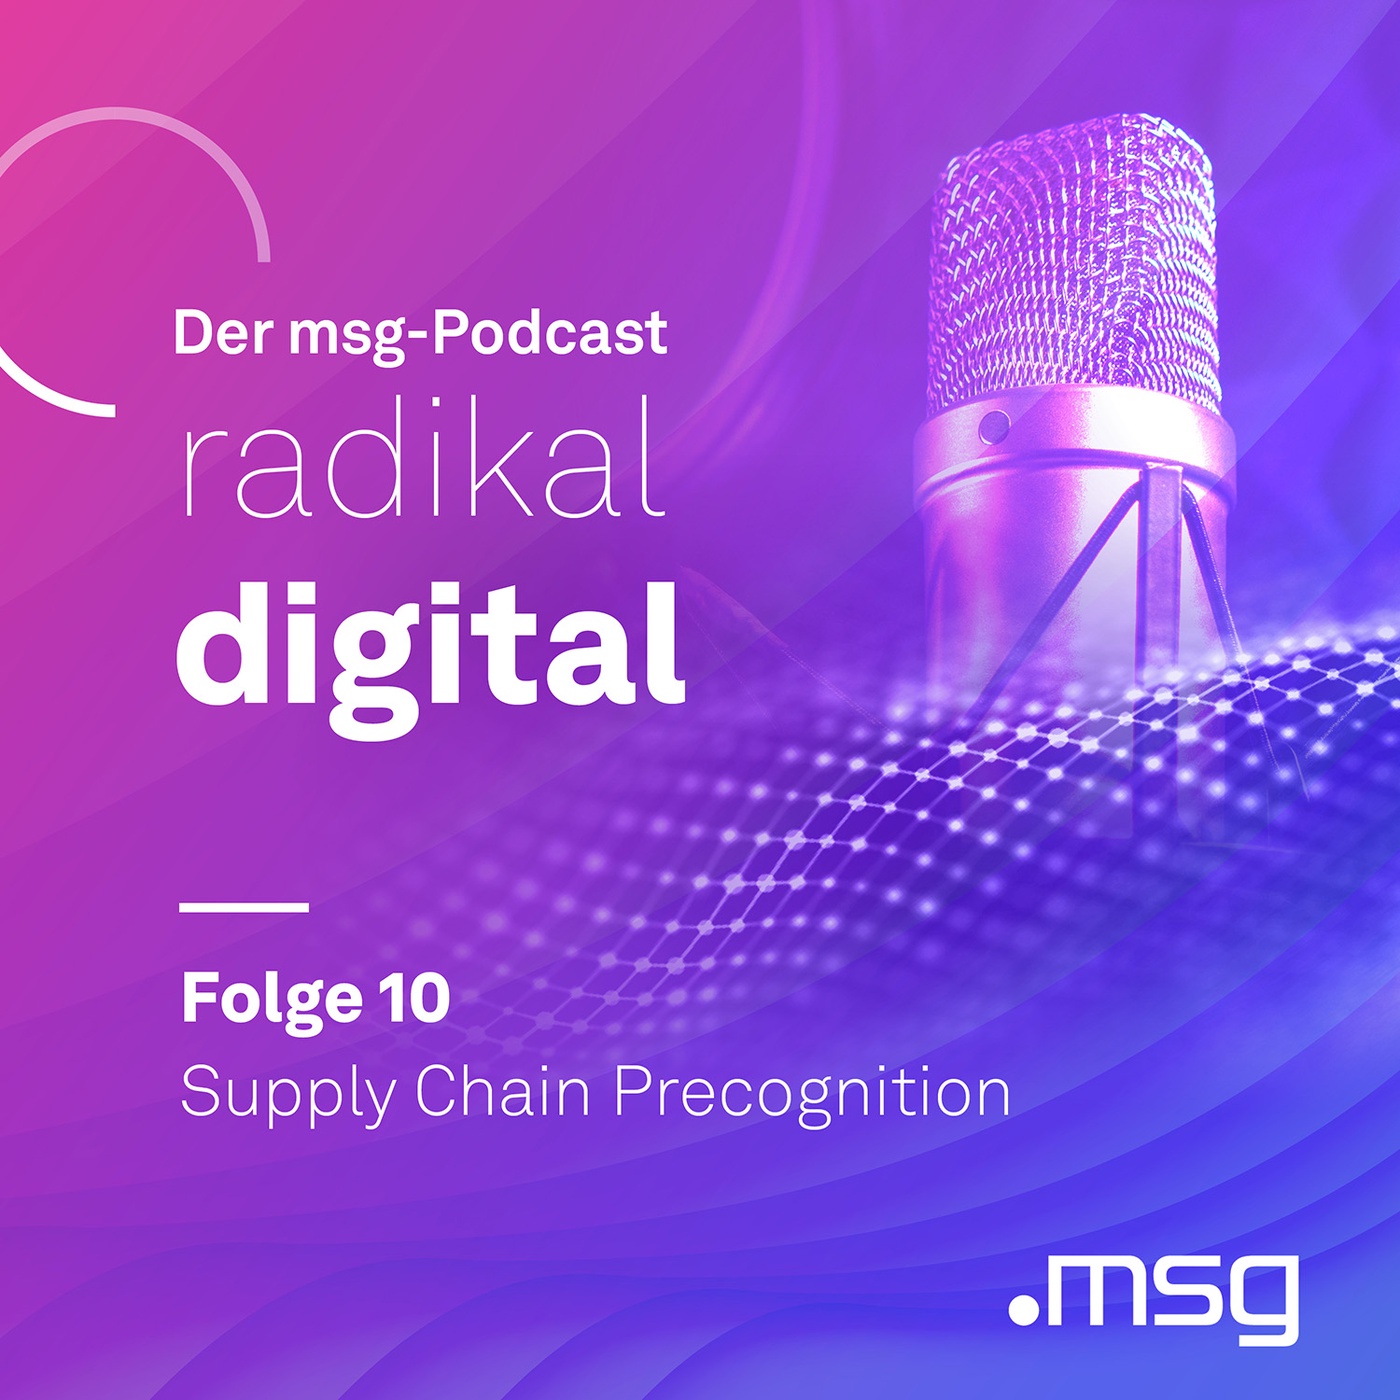 Folge 10: Supply Chain Precognition